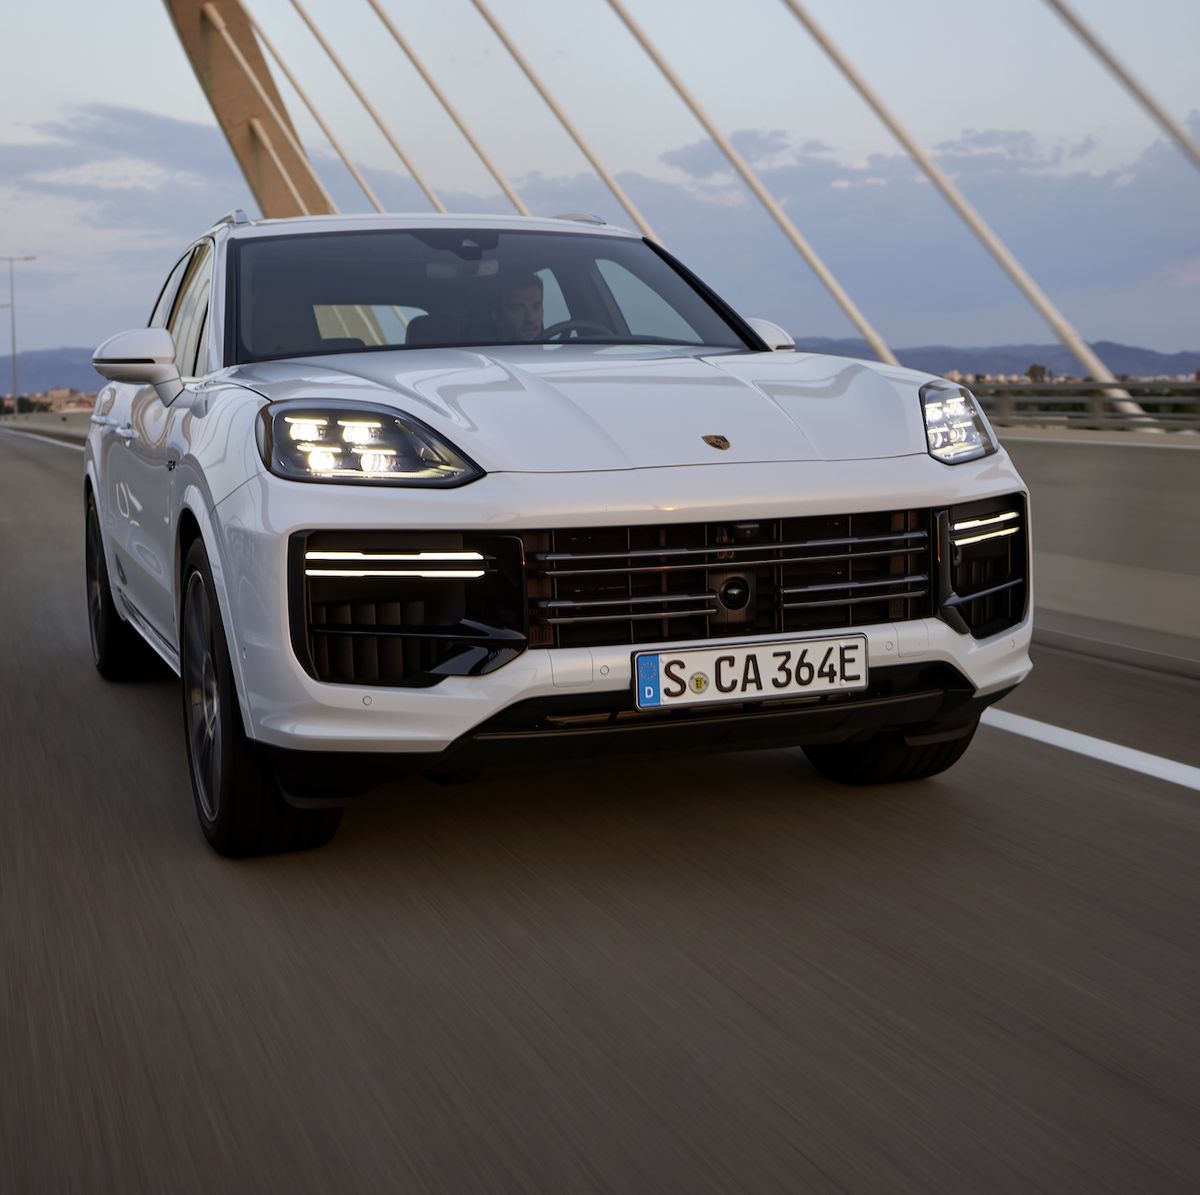 The 2024 Porsche Cayenne Turbo E-Hybrid Has 729 HP and 700 lb-ft of Torque